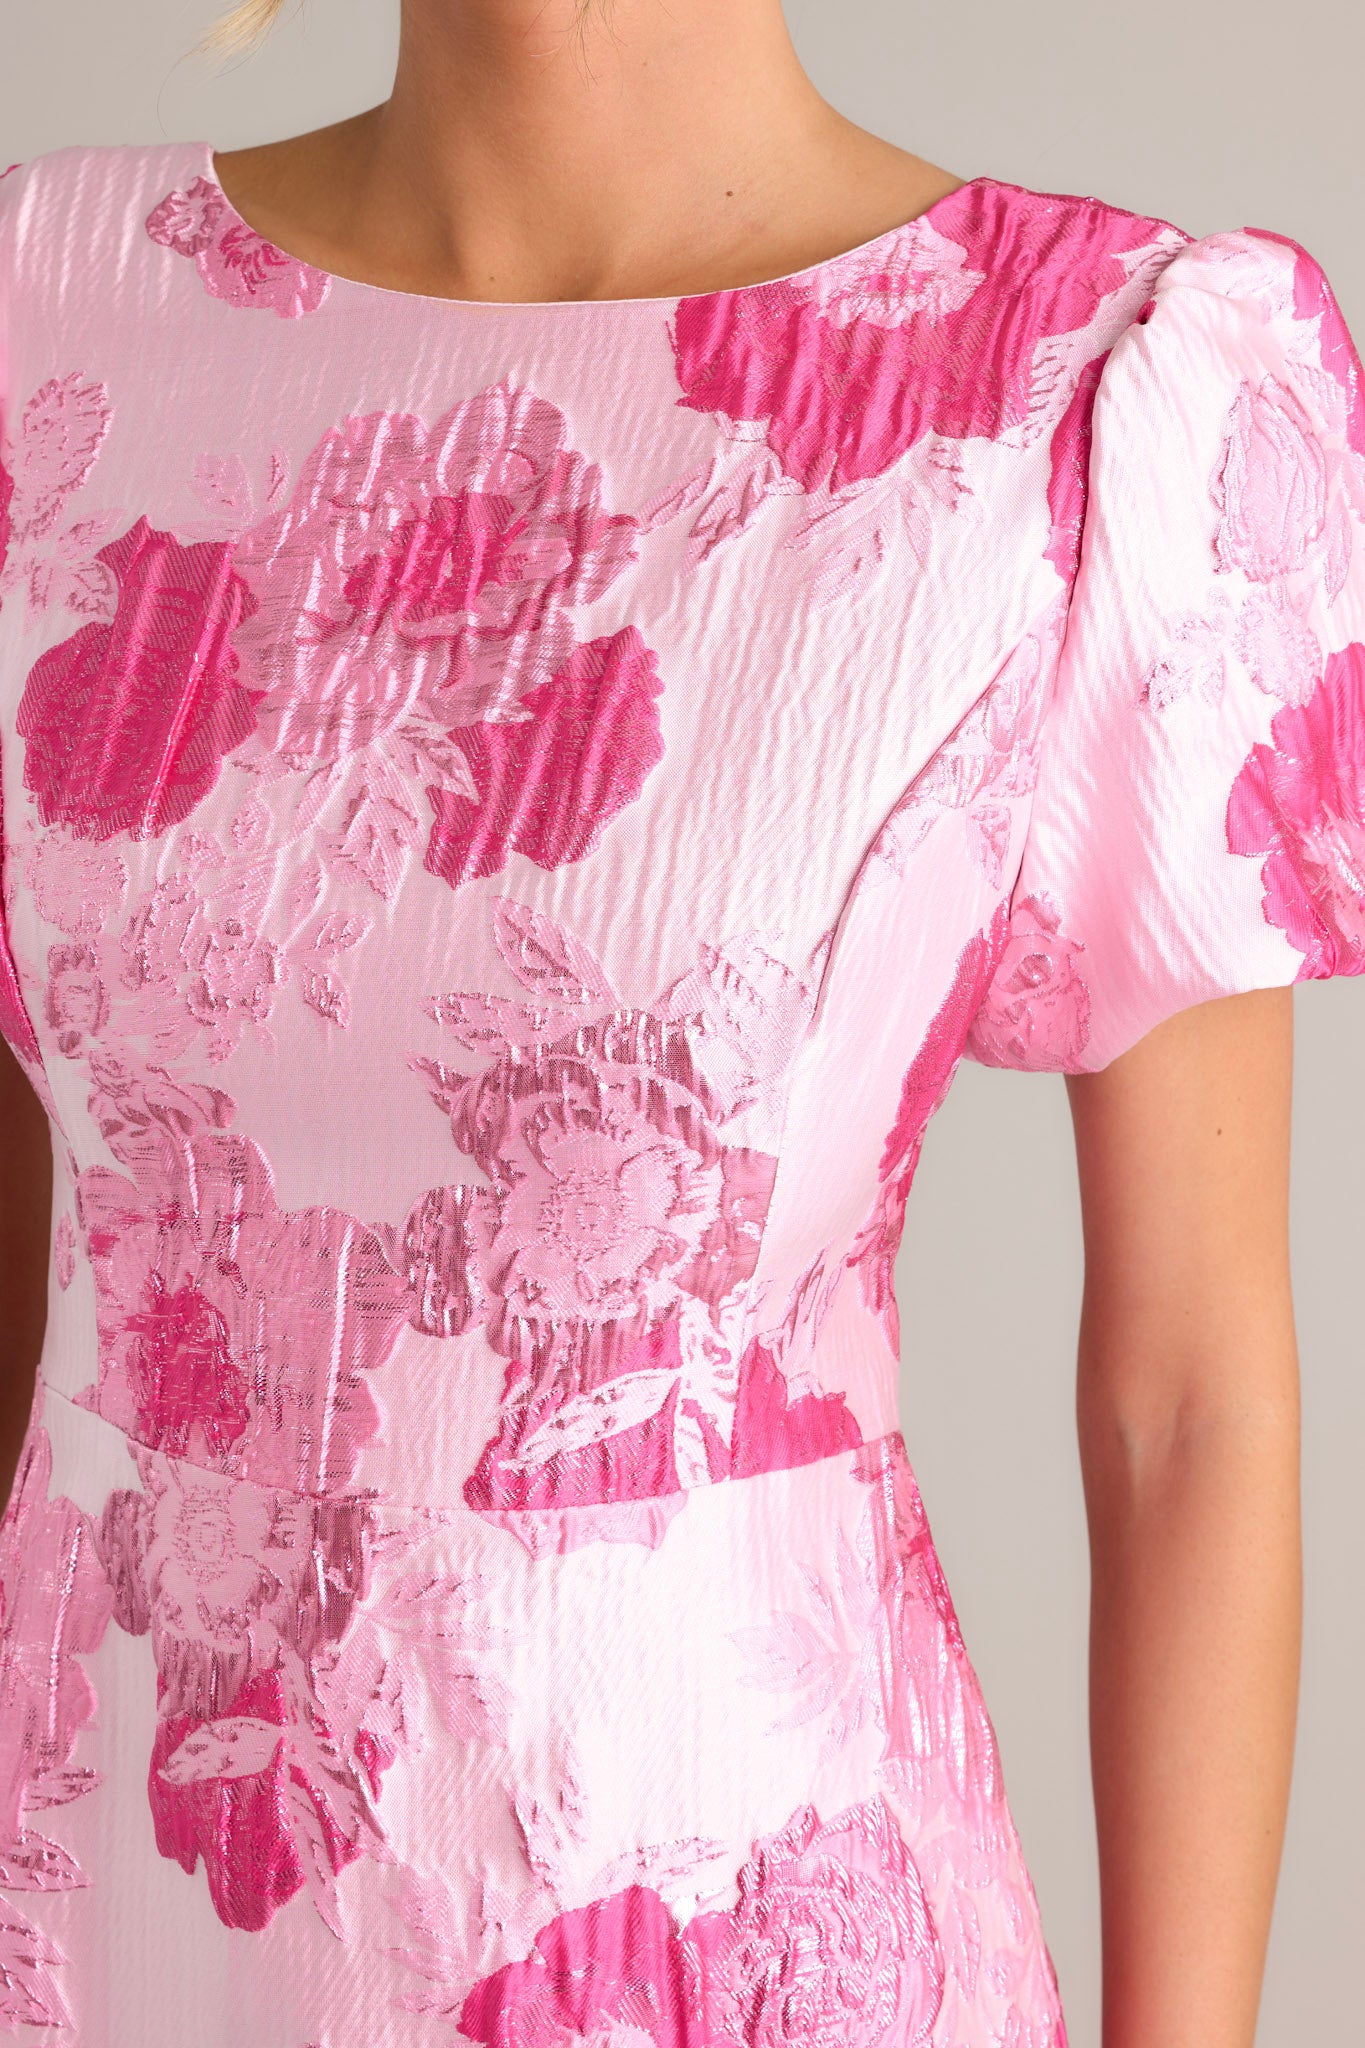 Close-up of the pink dress showing the boat neckline, short puff sleeves, and deep v-back with a zipper closure.